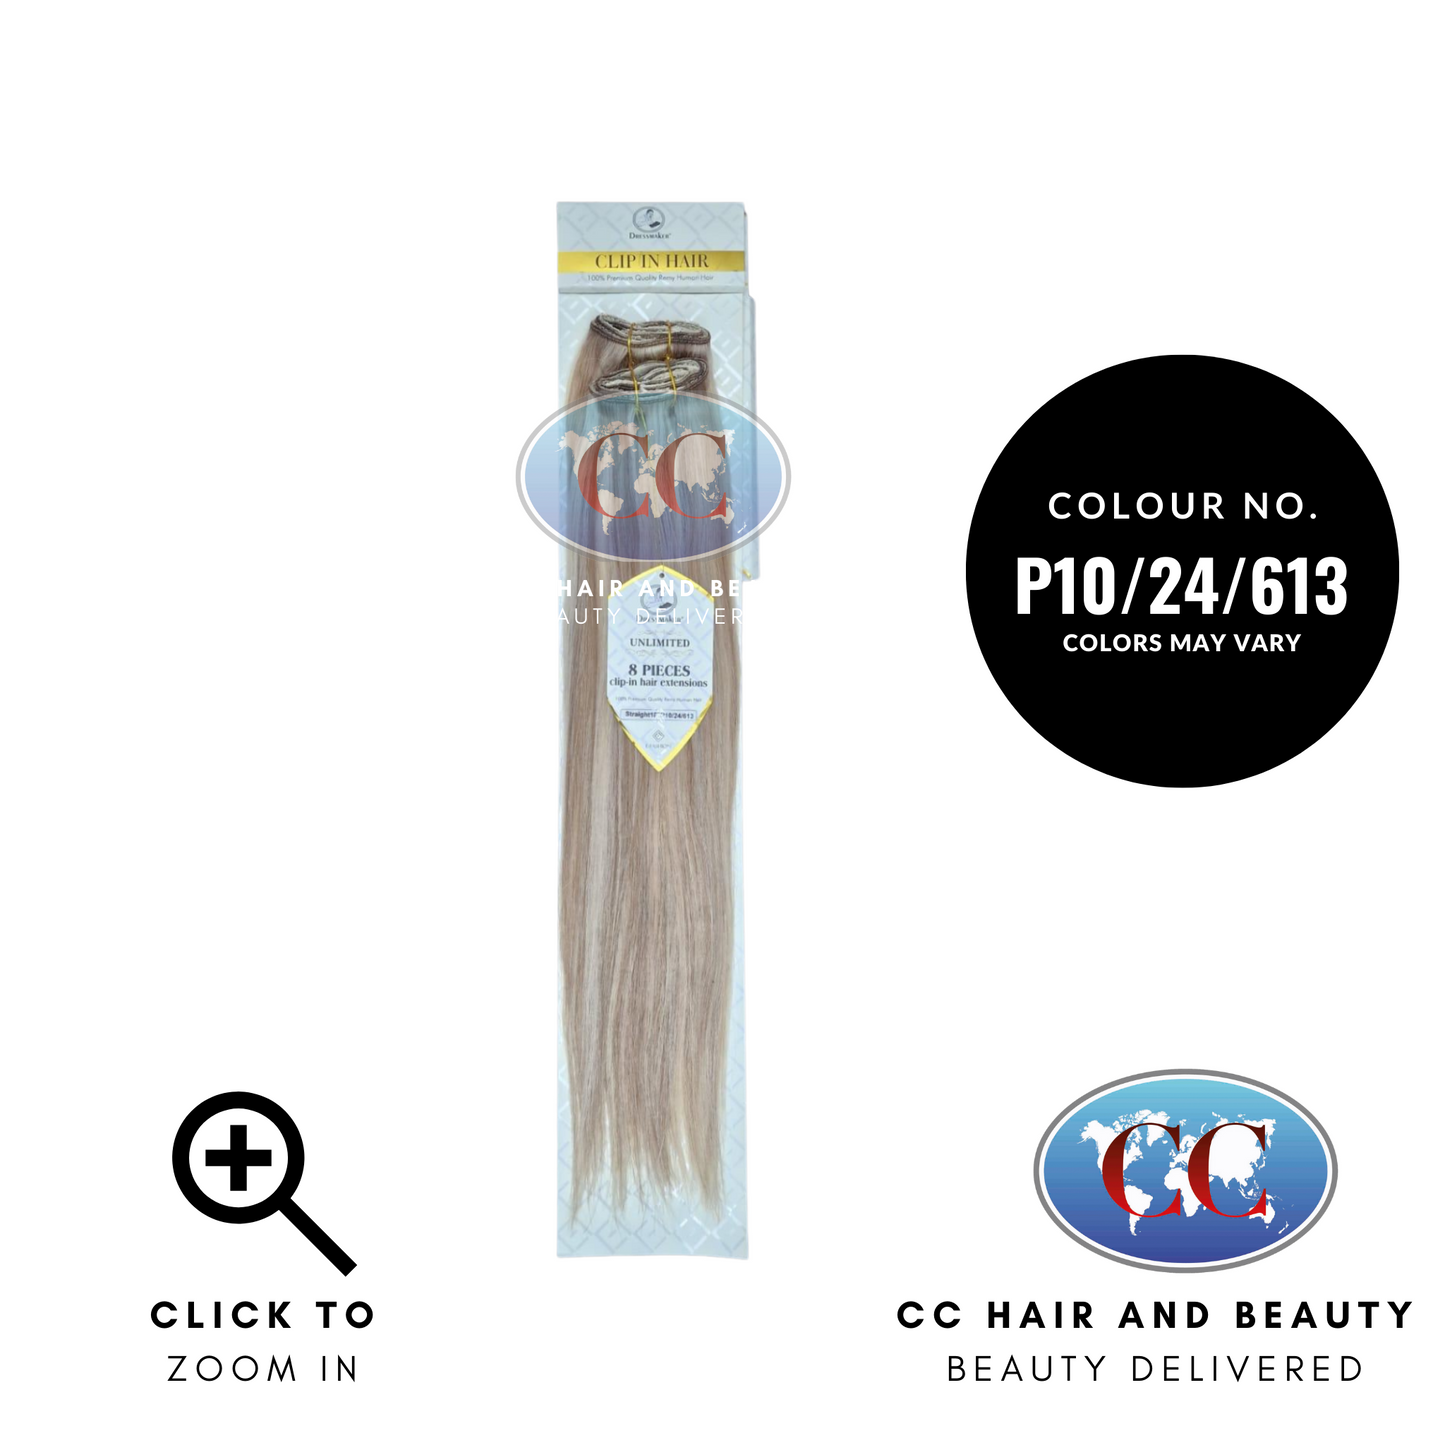 Dressmaker Unlimited 8 pcs Clip in Human Hair Extension 14, 18 & 22" - Straight